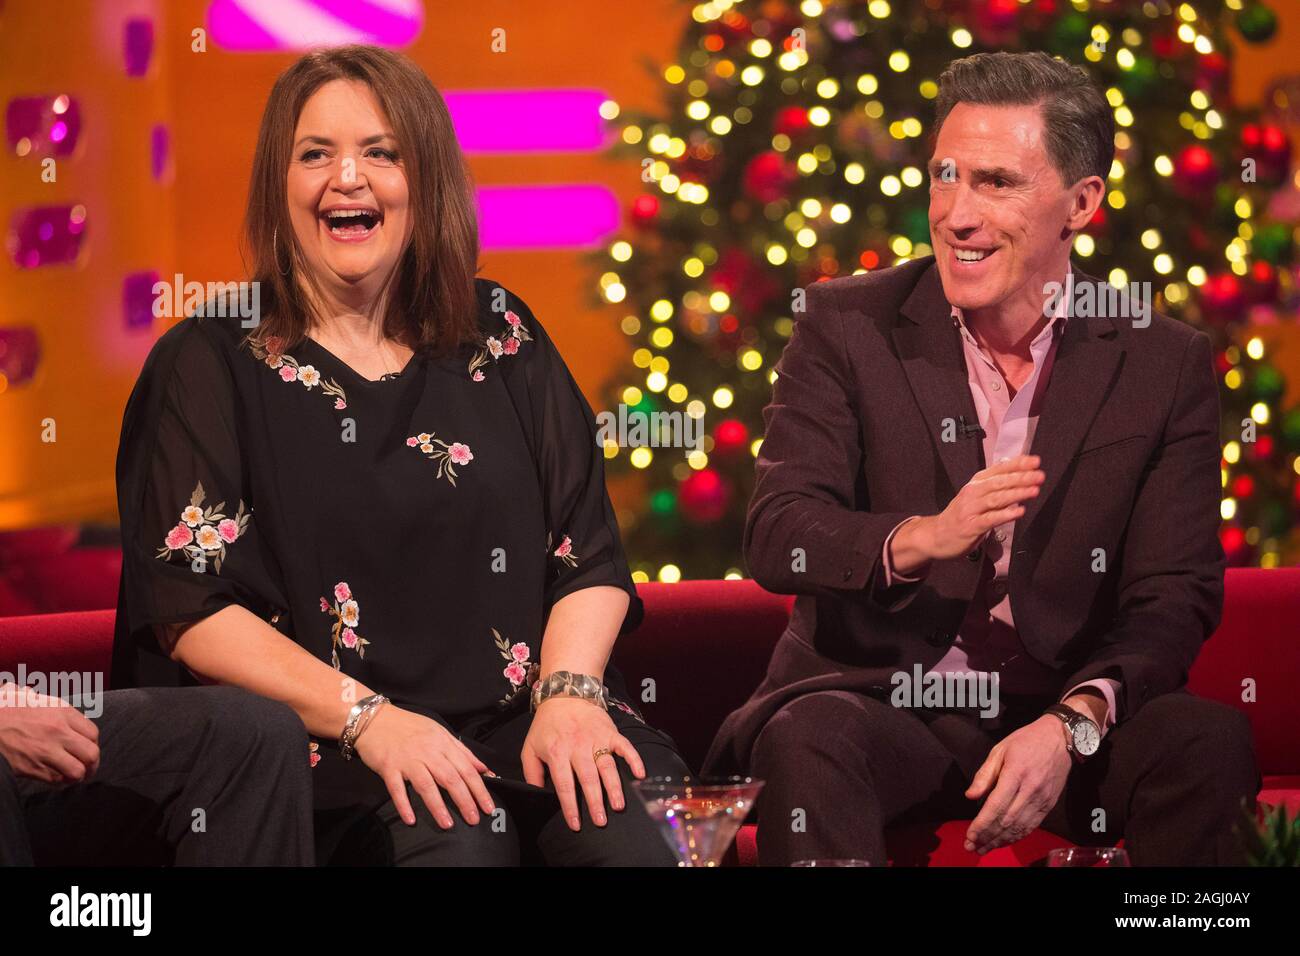 Ruth Jones and Rob Brydon during the filming for the Graham Norton Show at BBC Studioworks 6 Television Centre, Wood Lane, London, to be aired on BBC One on Friday evening. Picture date: Thursday December 19, 2019. Photo credit should read: PA Images on behalf of So TV Stock Photo